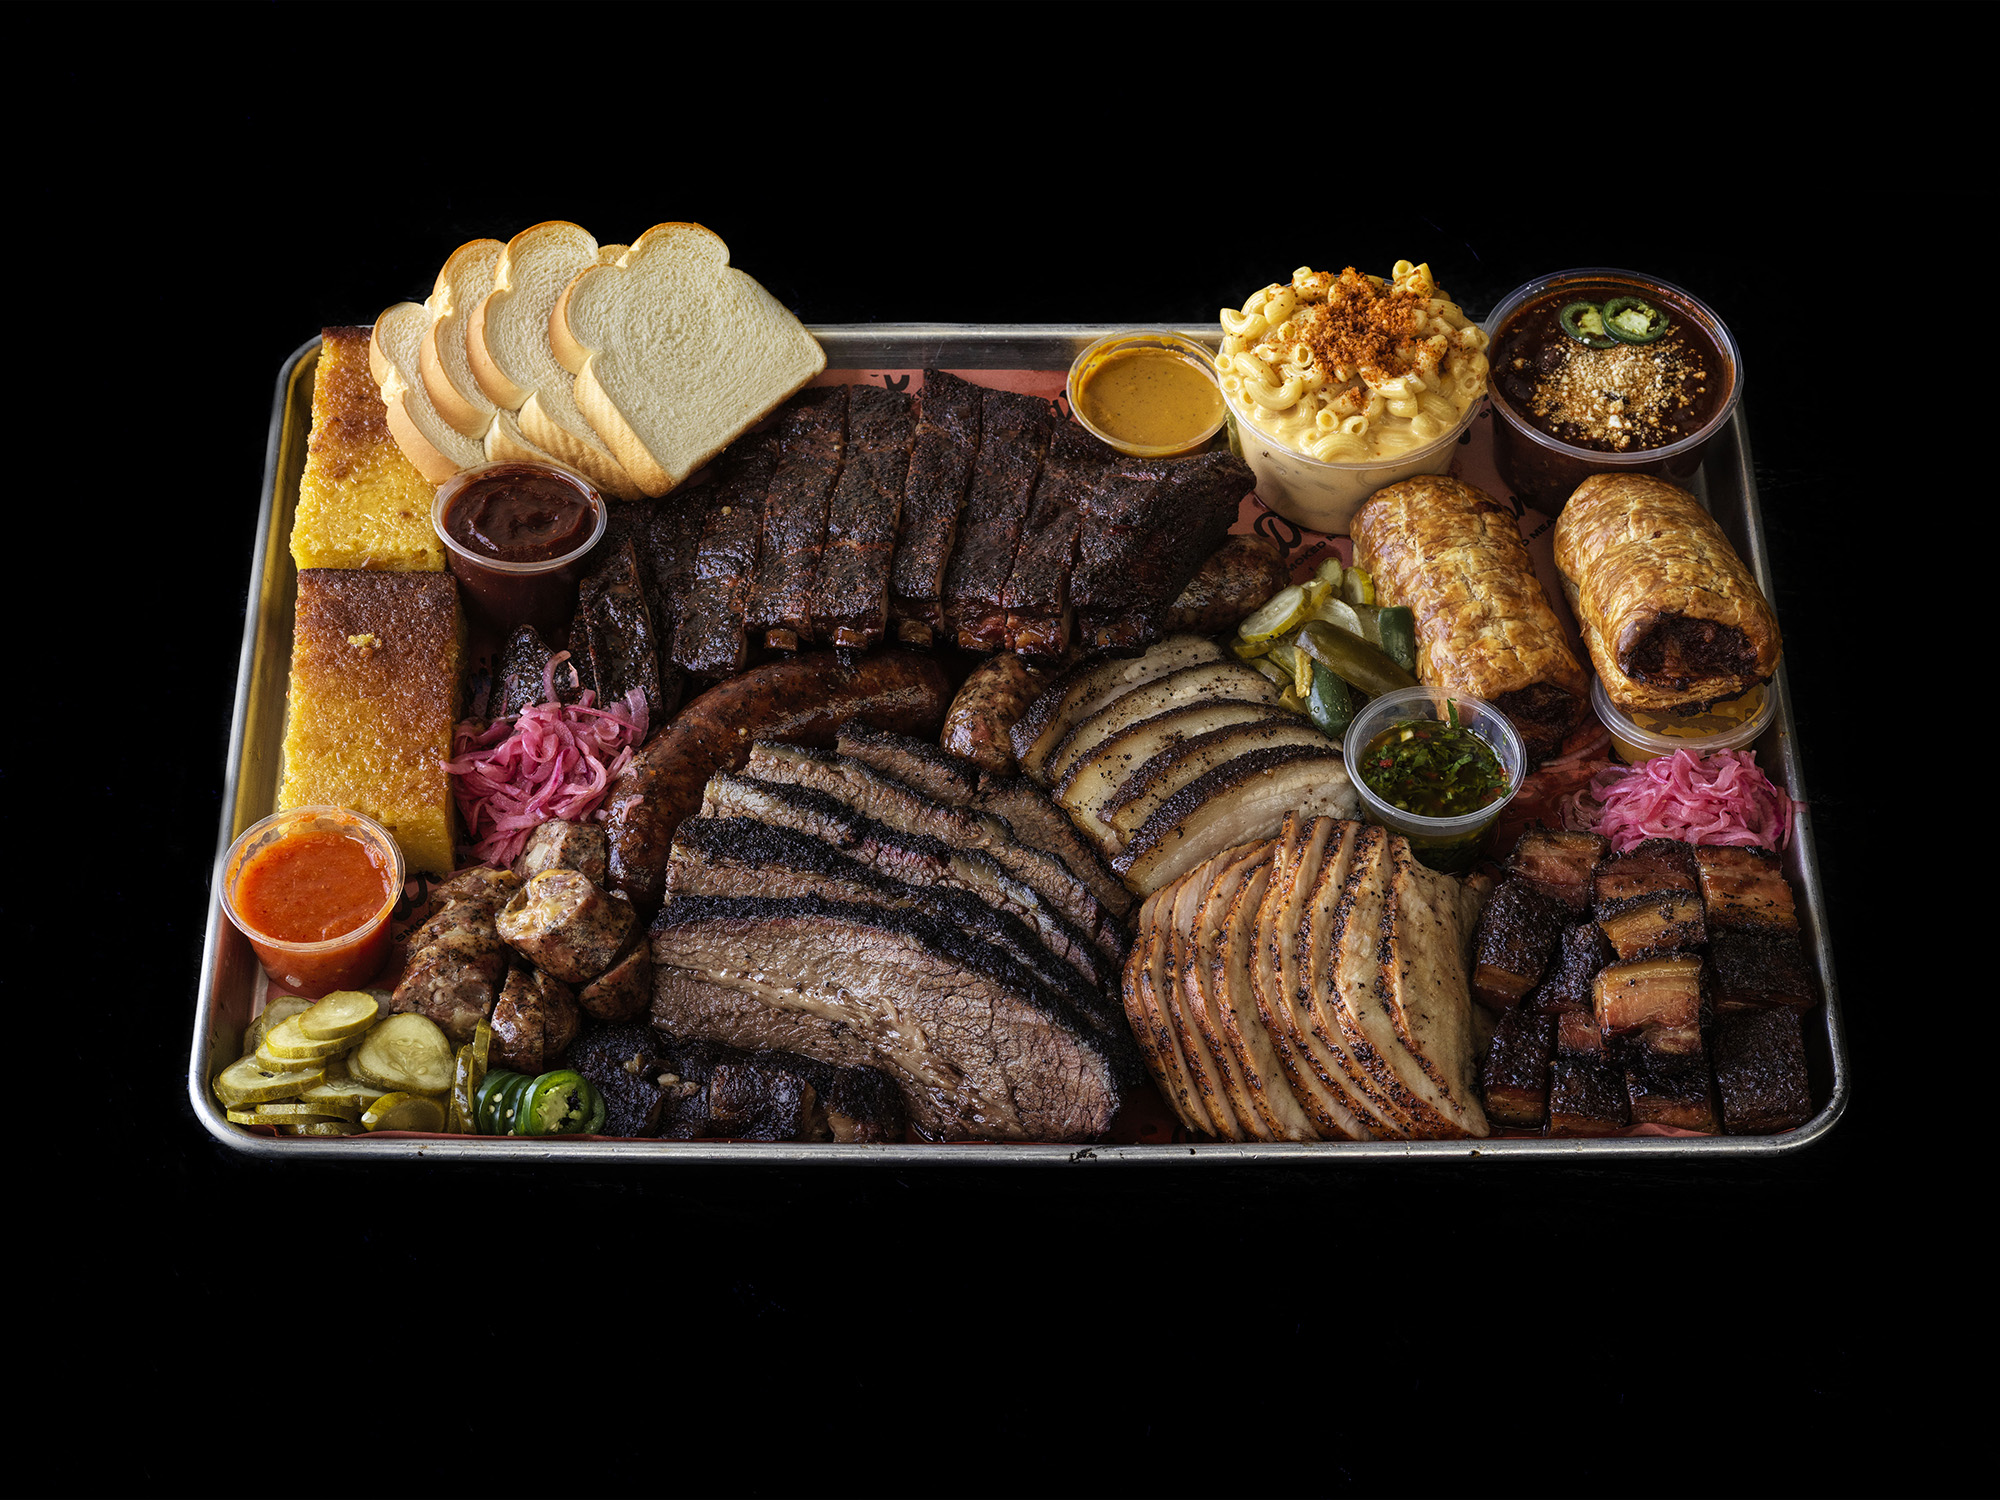 Behold – a Big Don’s barbeque platter. Order in advance but be quick, they sell out in around seven minutes.